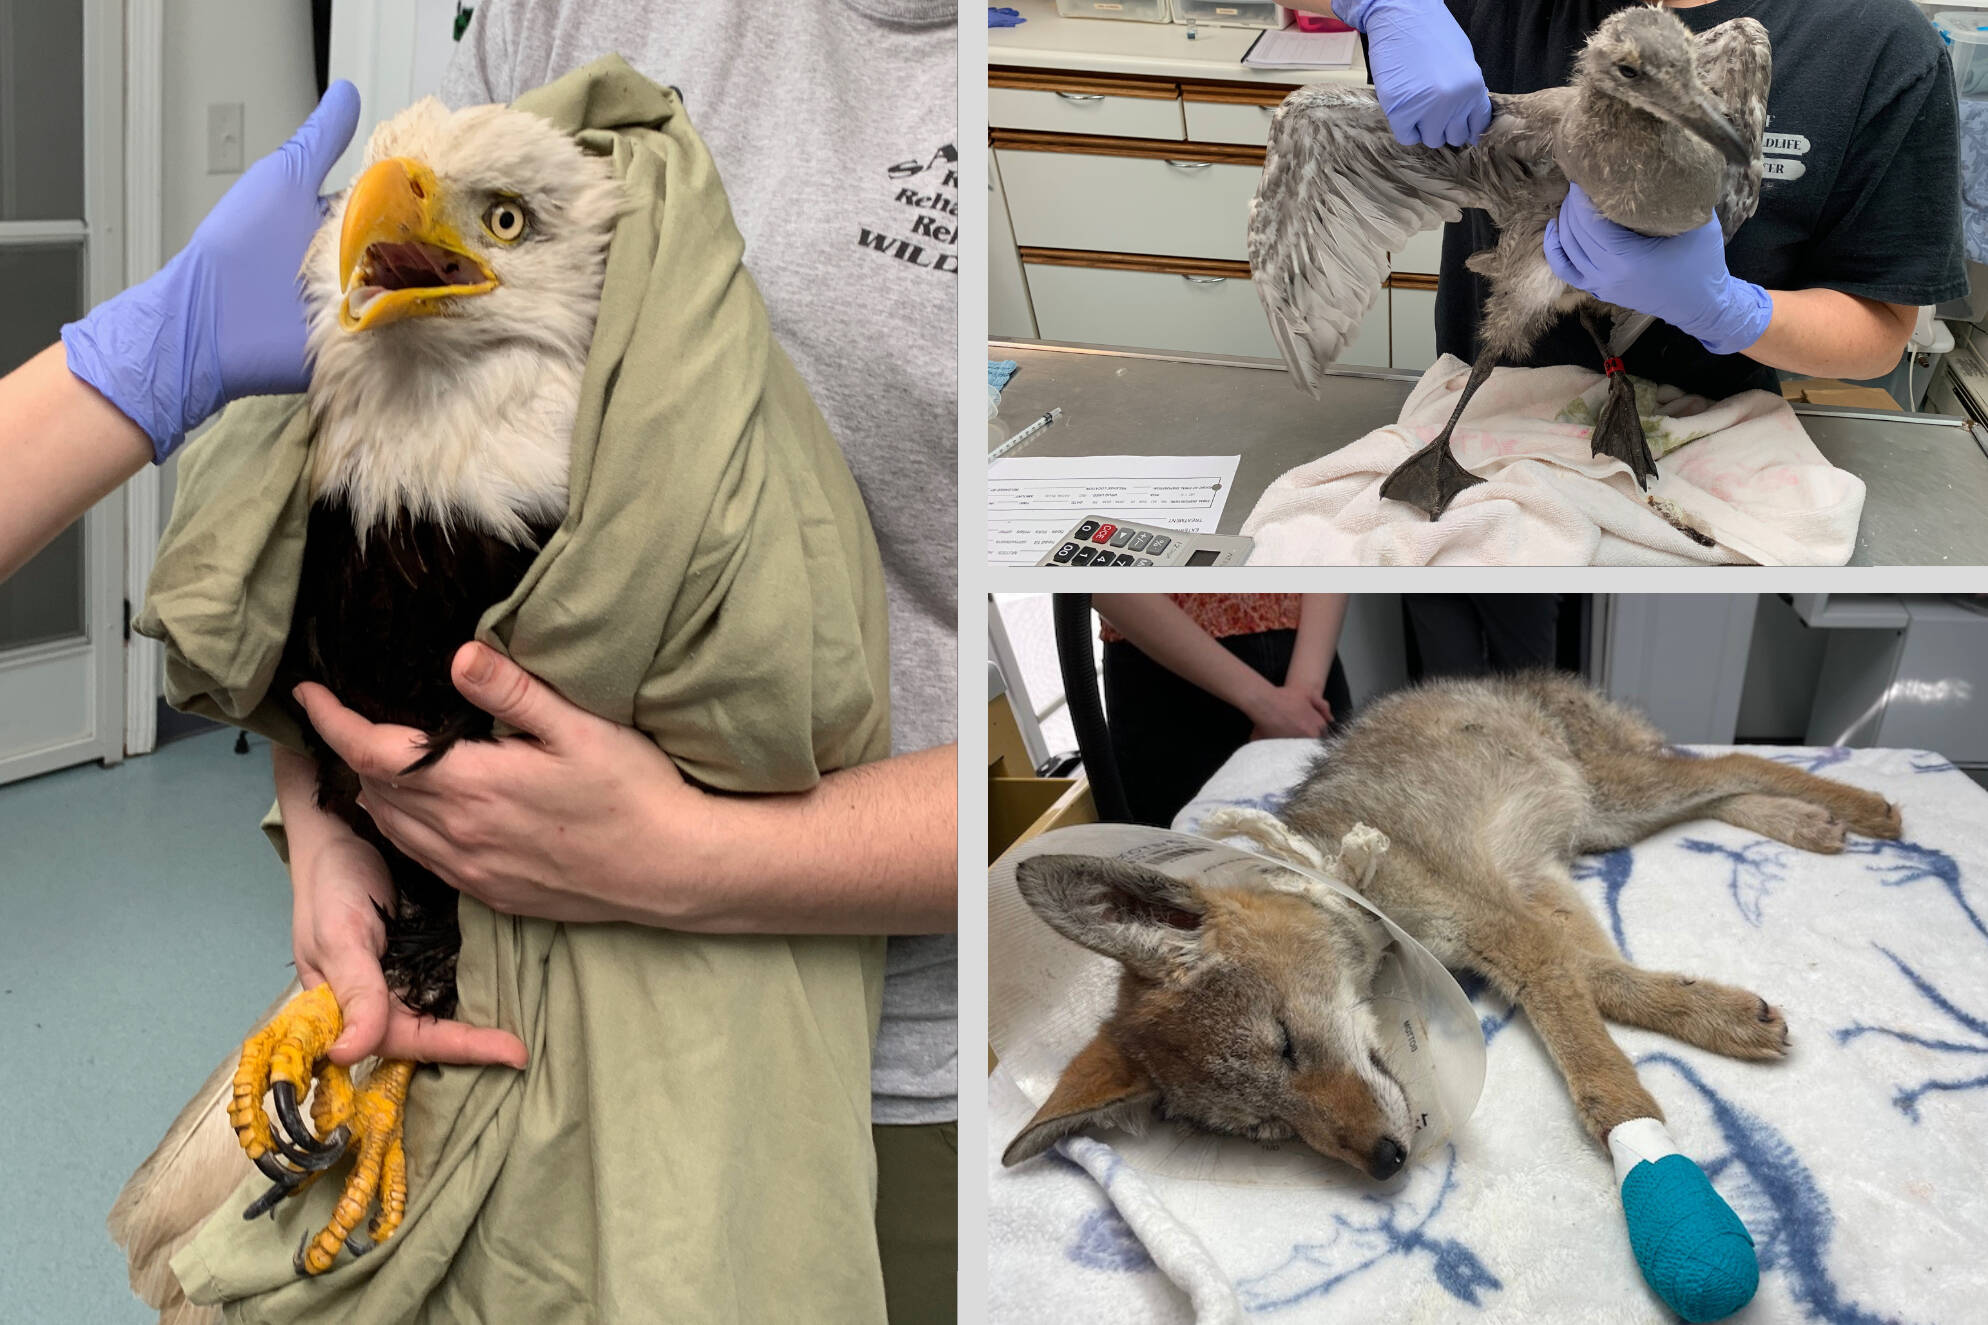 The center attends to over 3,000 animals a year, spanning 135 species. Photos courtesy of the Sarvey Wildlife Care Center.